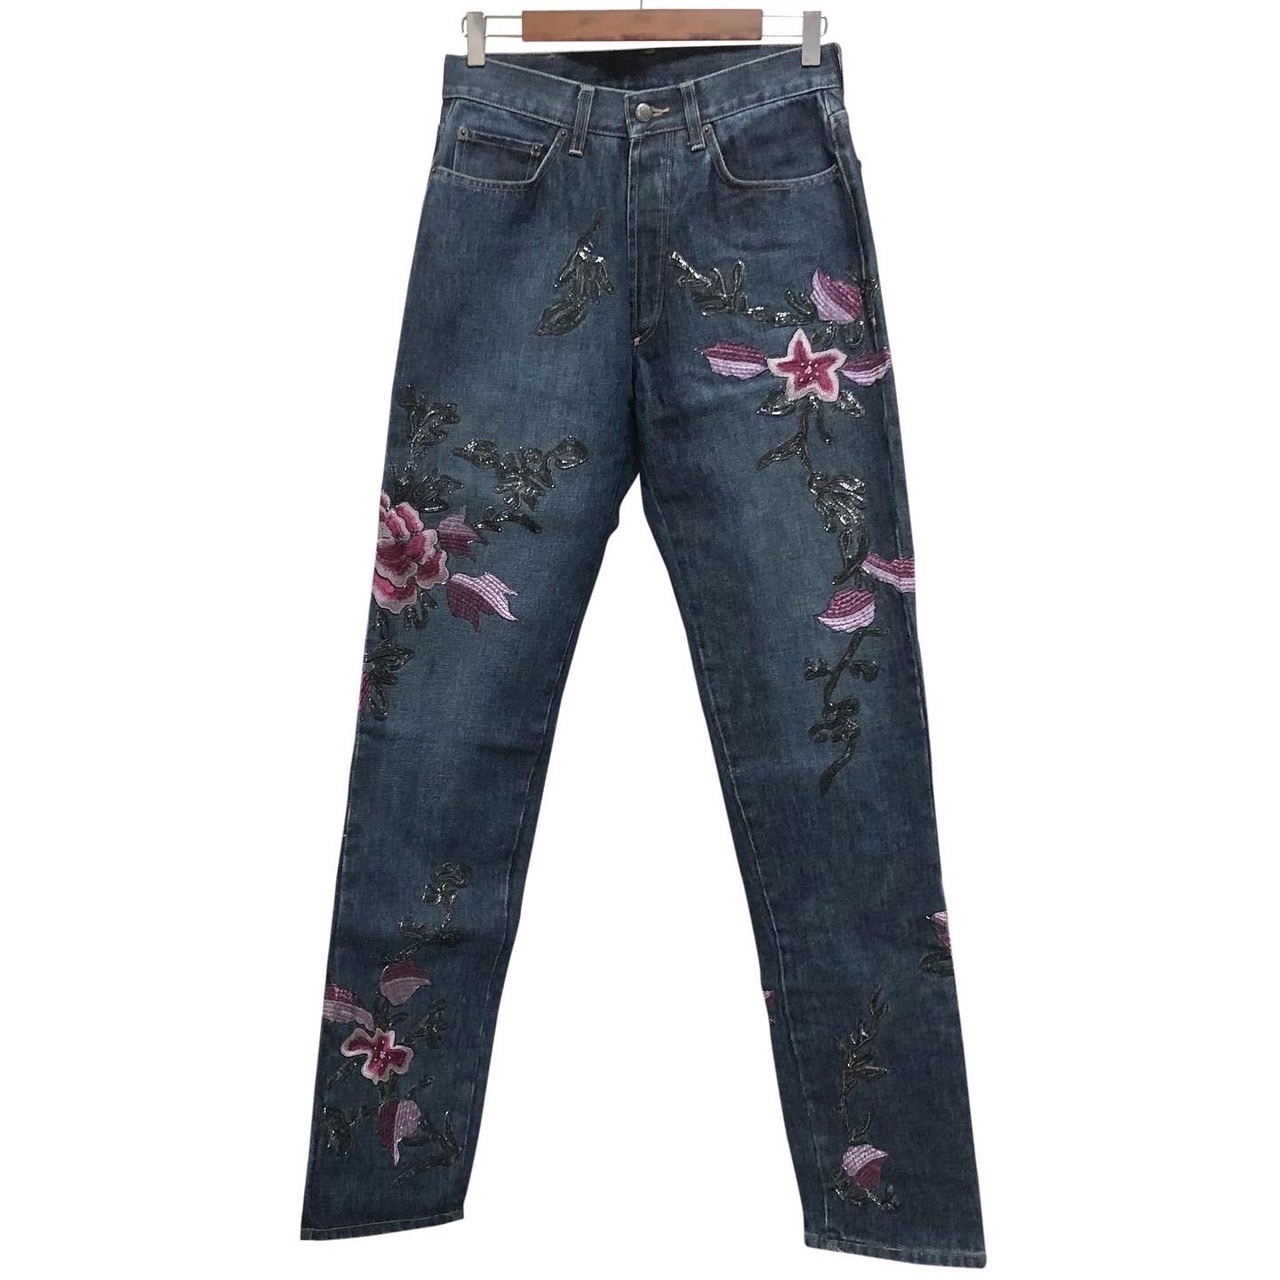 GUCCI by Tom Ford embroidery denim pants | NOIR ONLINE